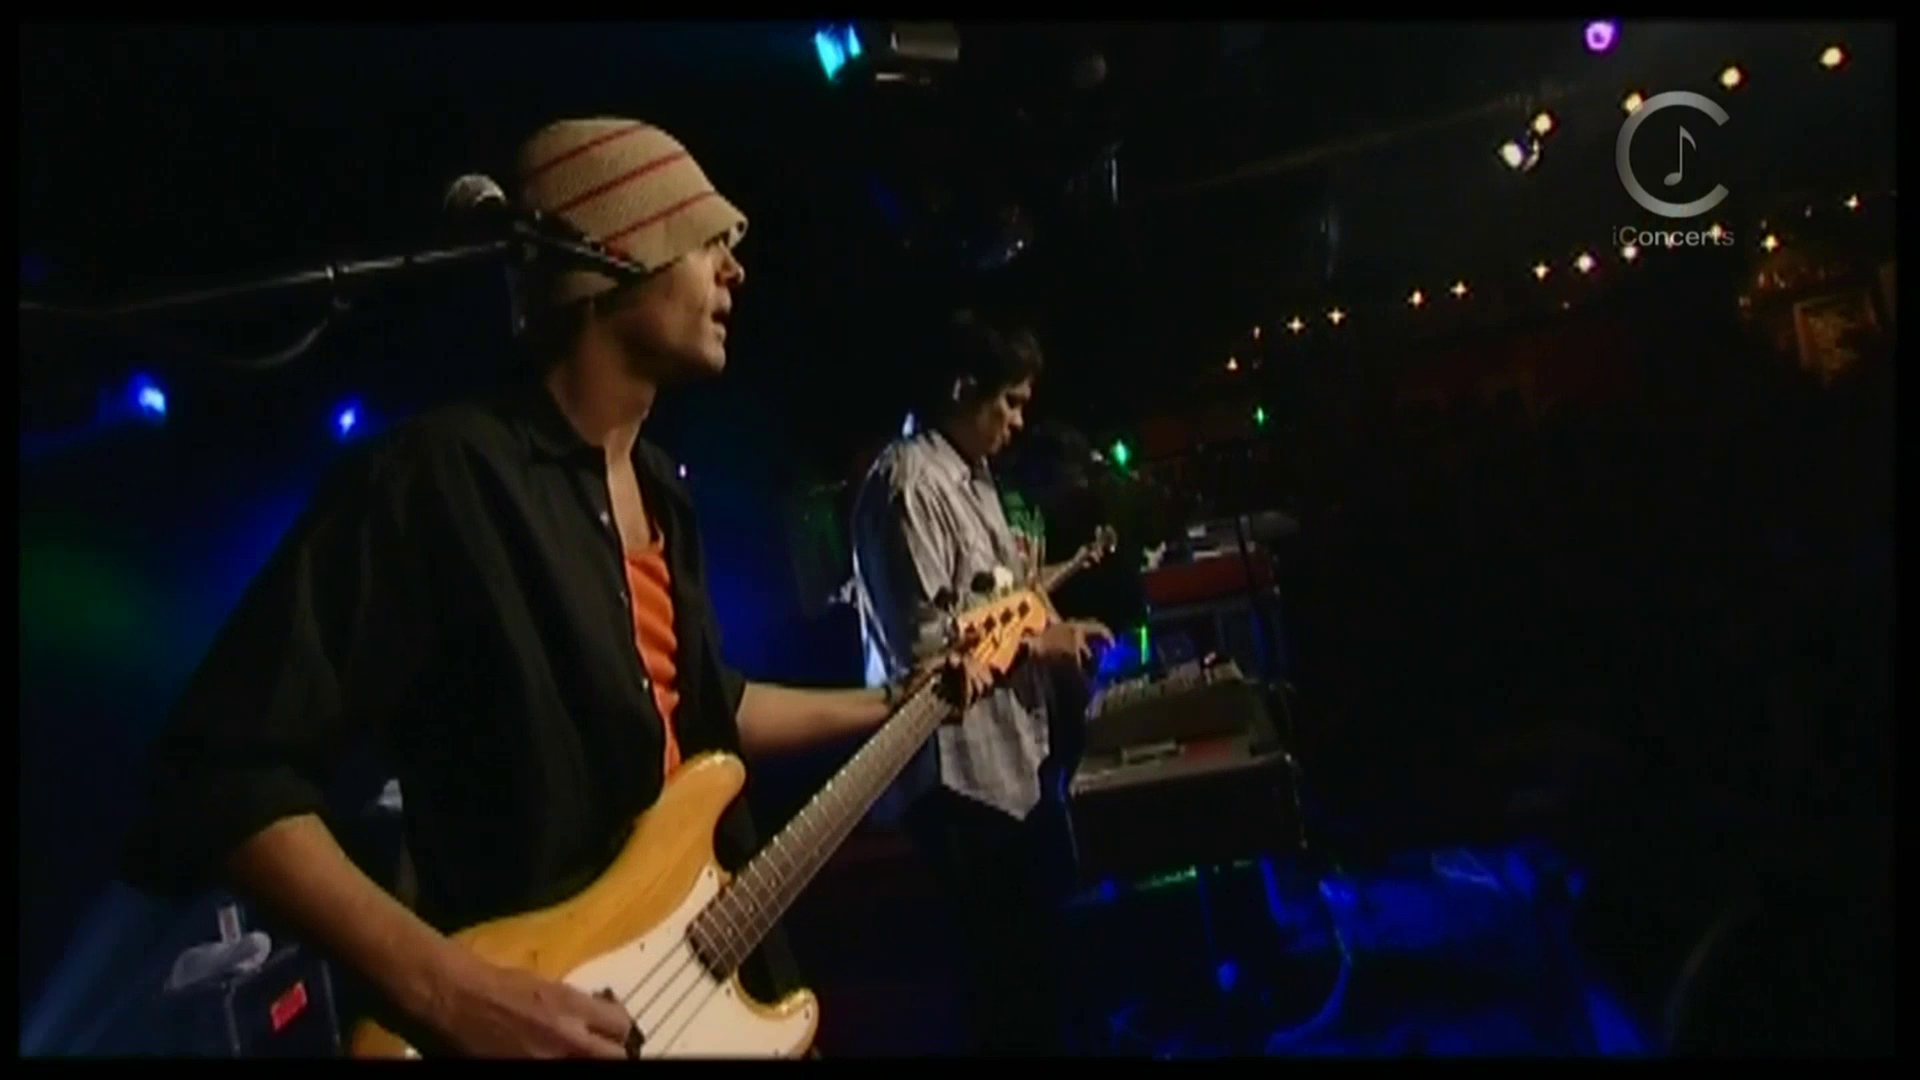 2004 General Electrics - Live at The New Morning [HDTV 1080p] 2